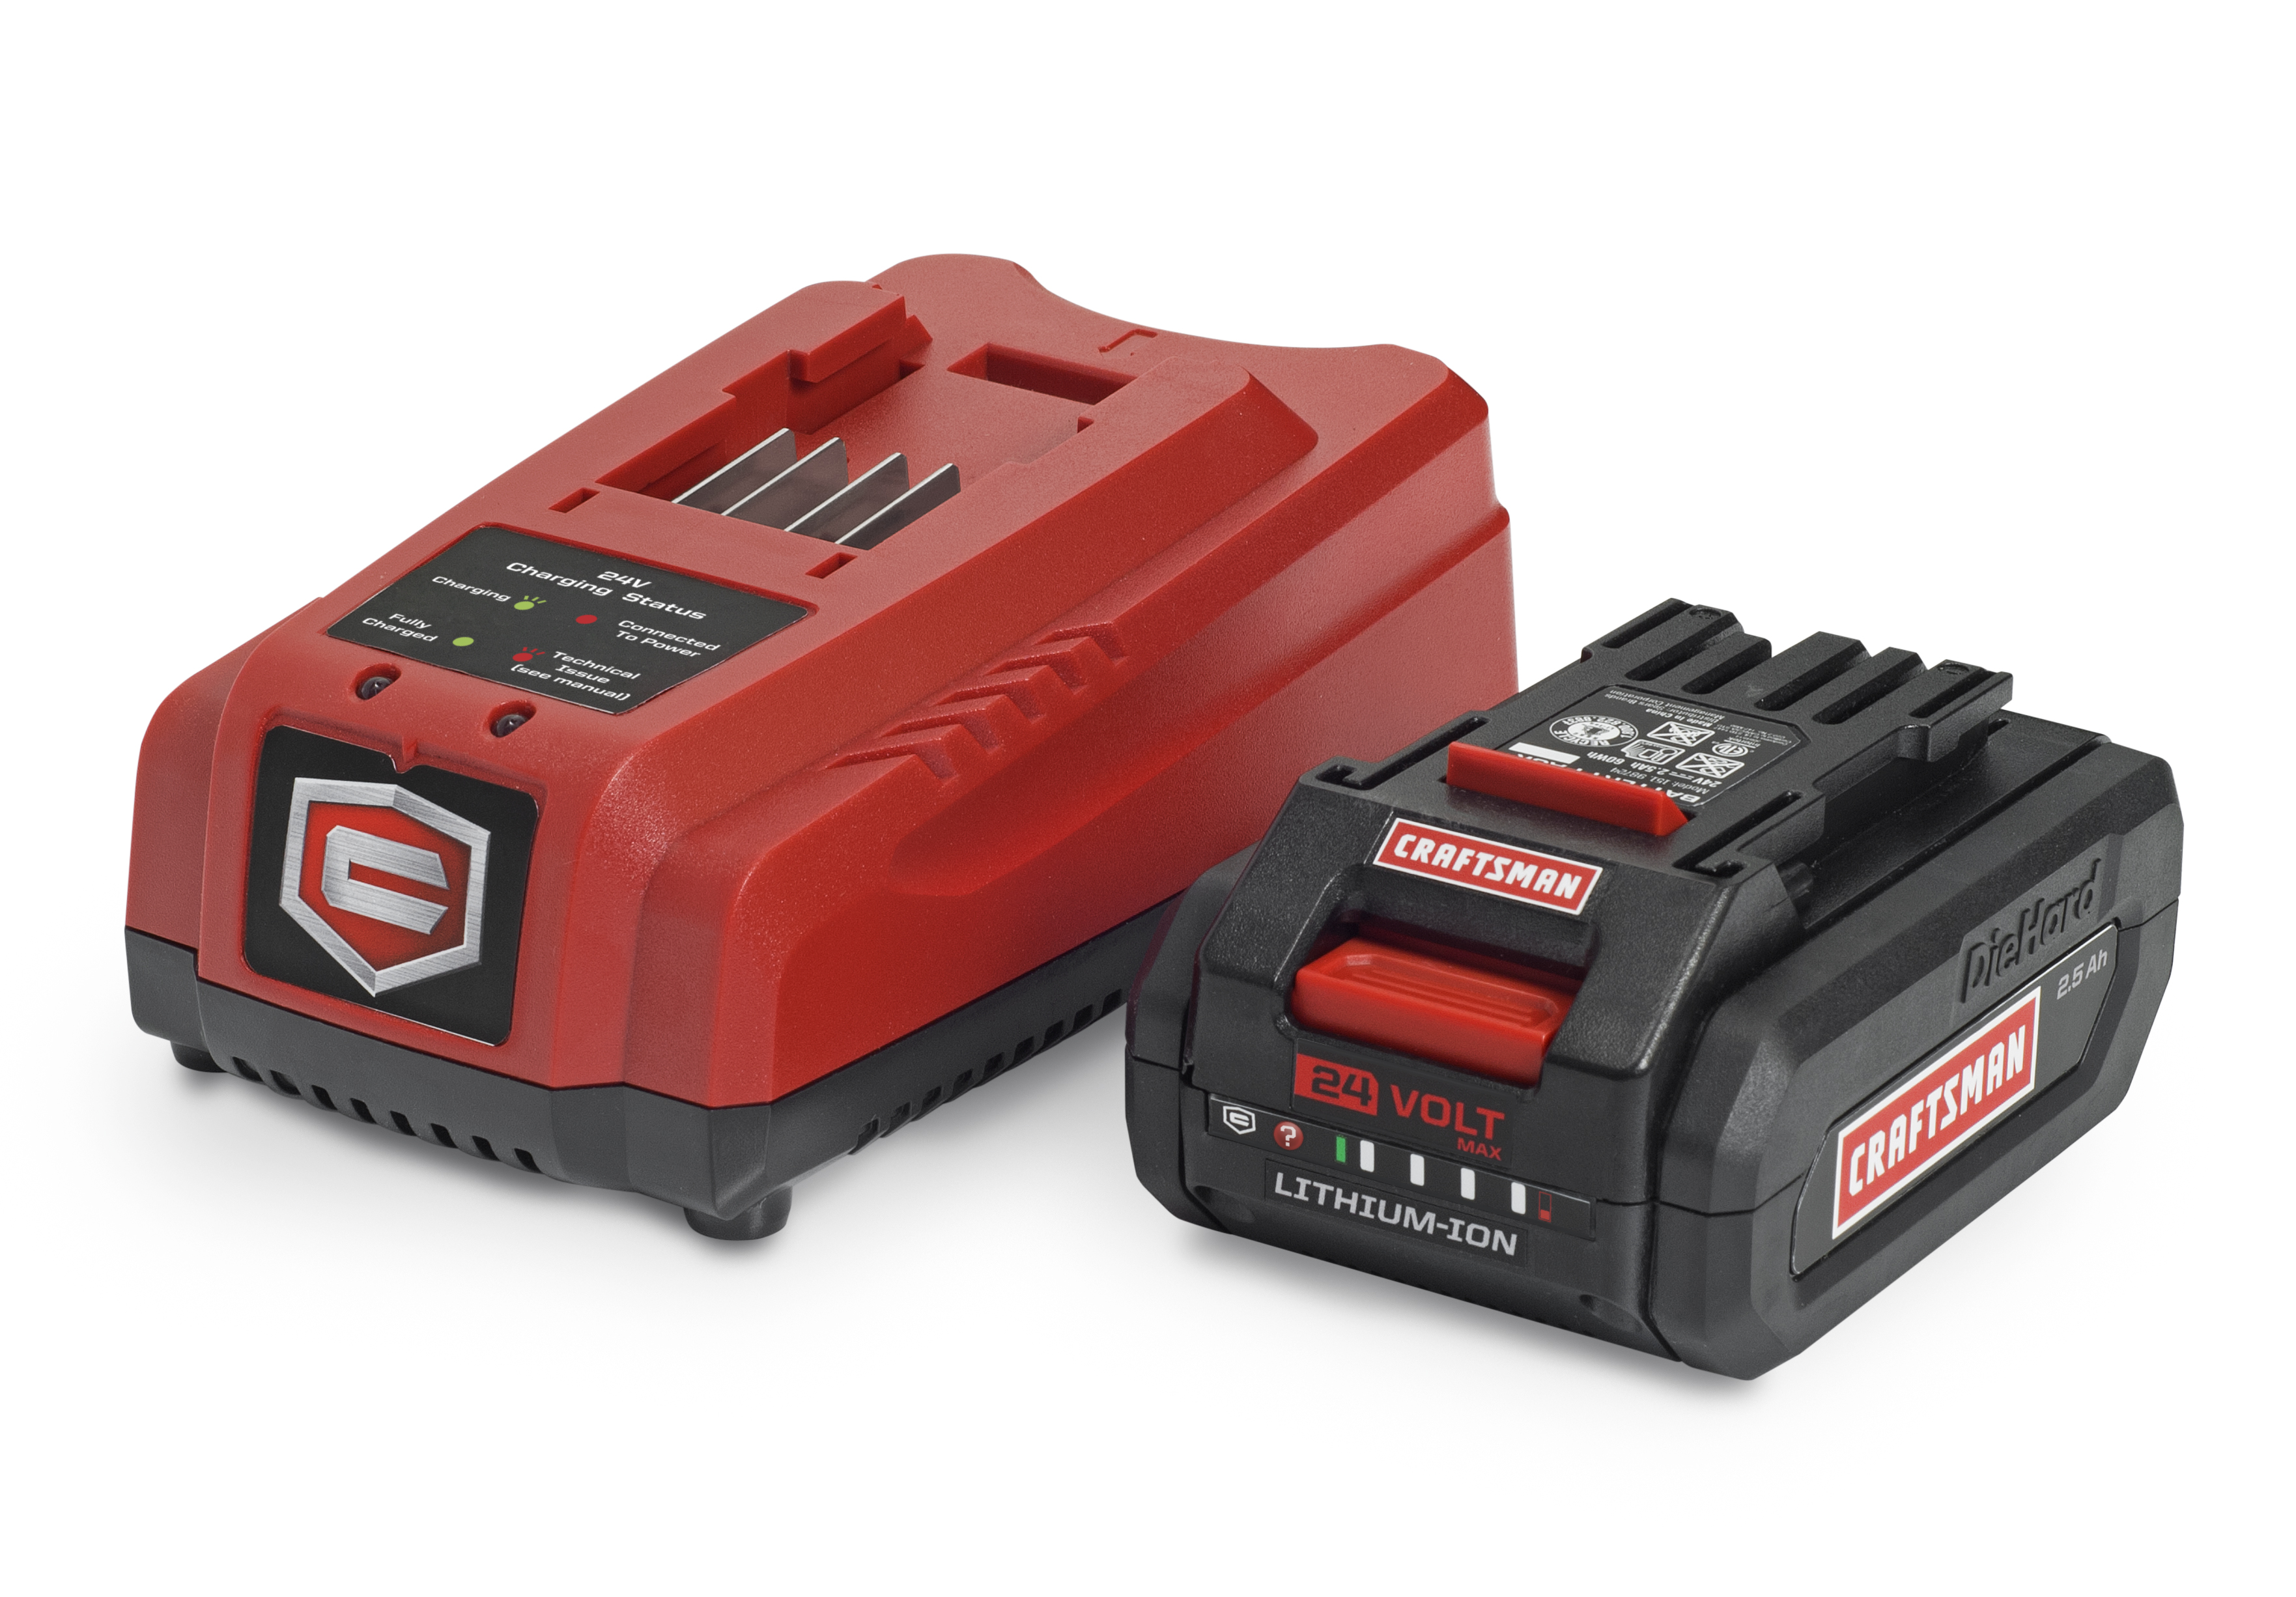 craftsman battery weed eater